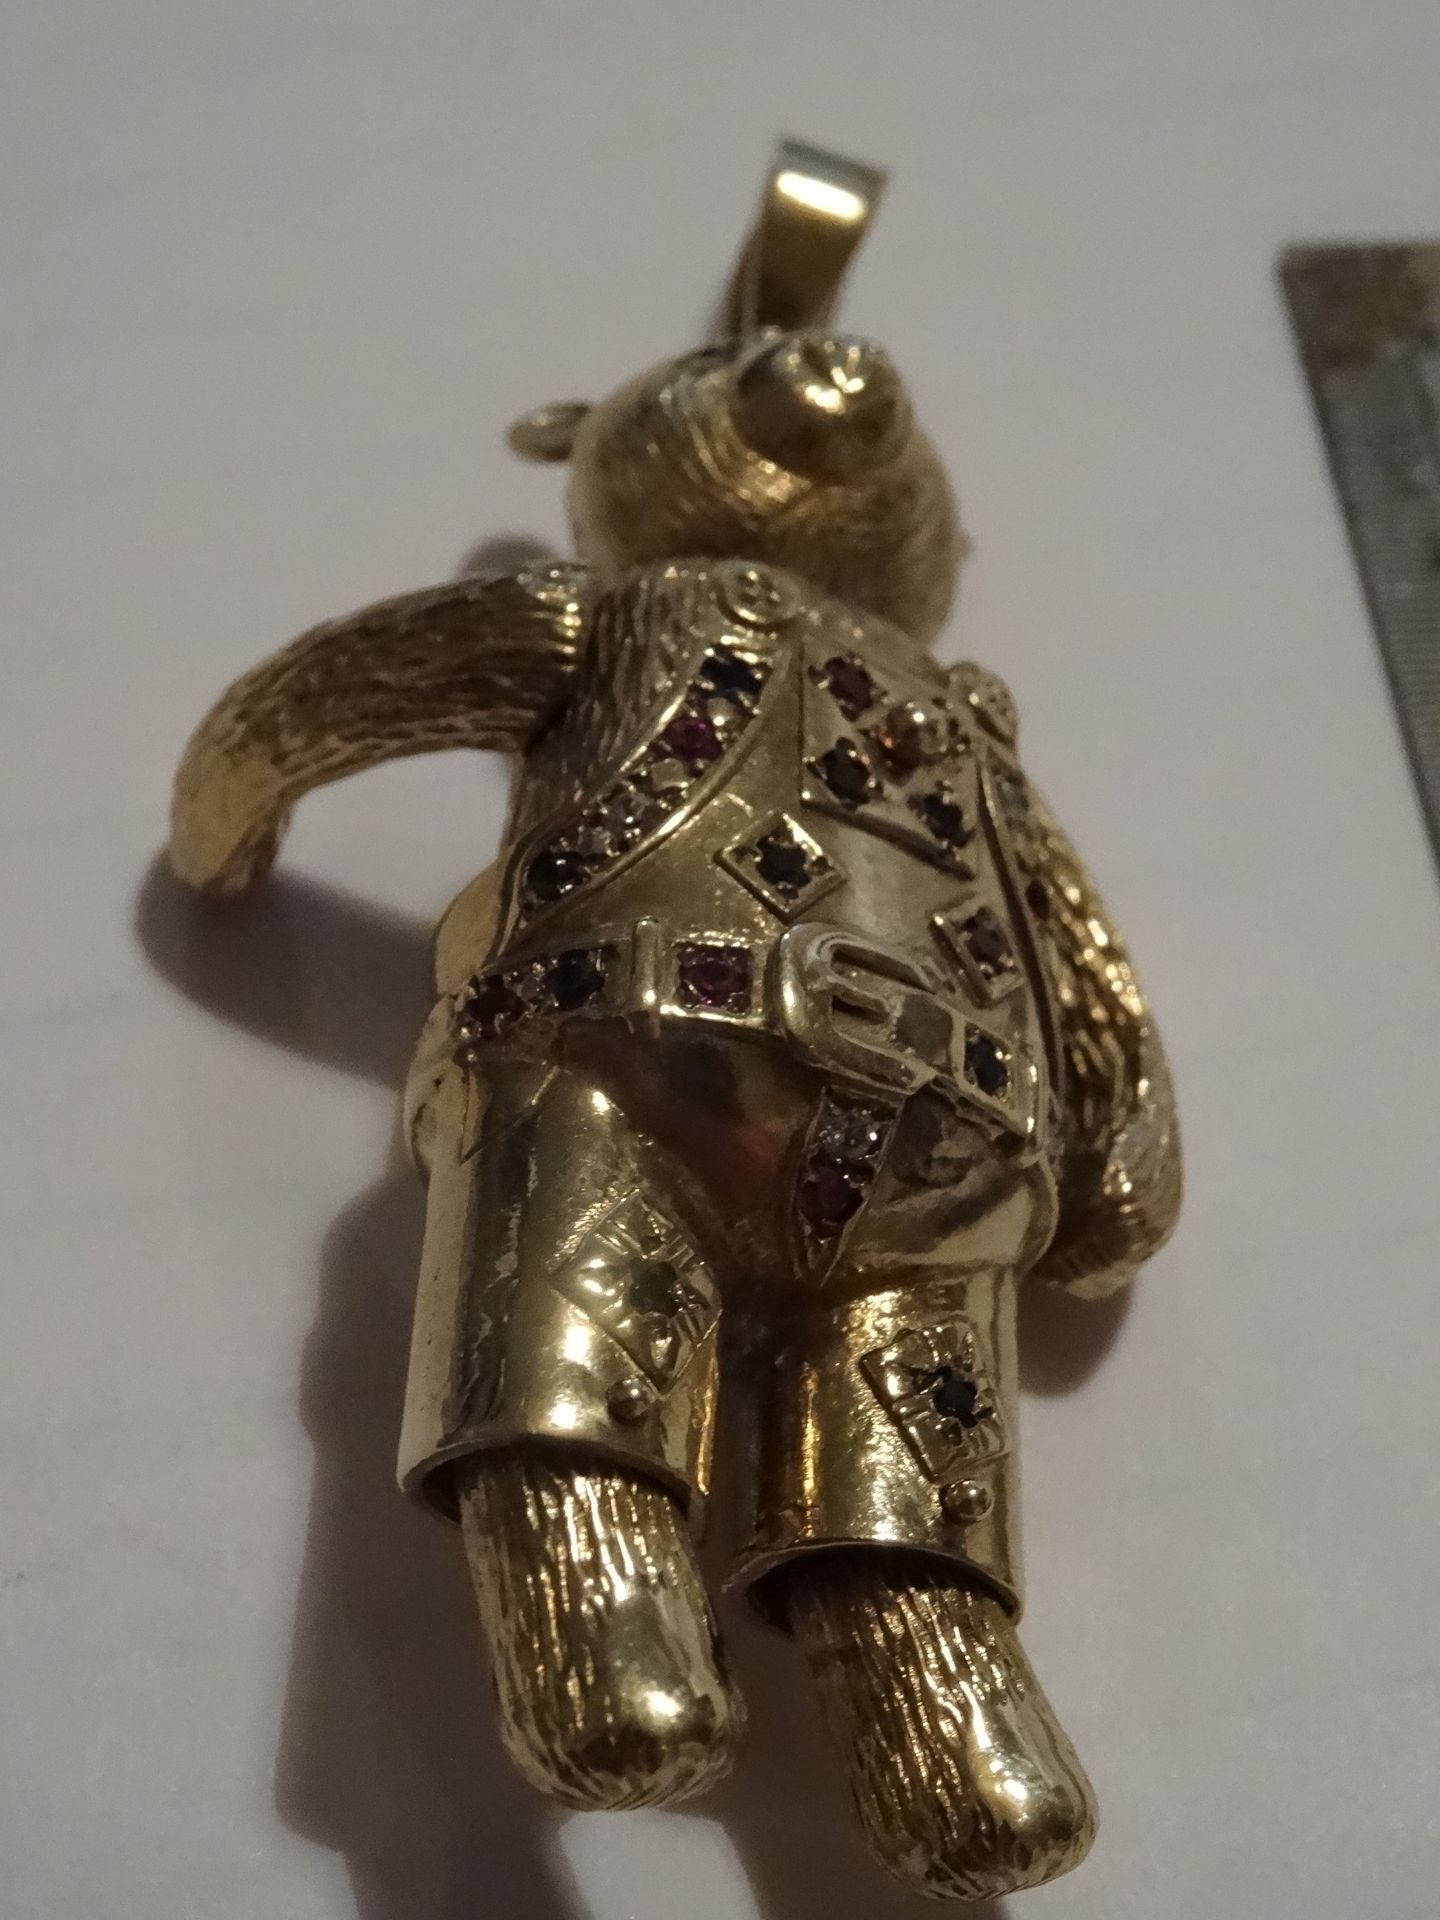 9 Carat Yellow Gold Moveable Teddy Bear Pendant. Set with 26 Stones in green, clear, red and blue. - Image 3 of 3